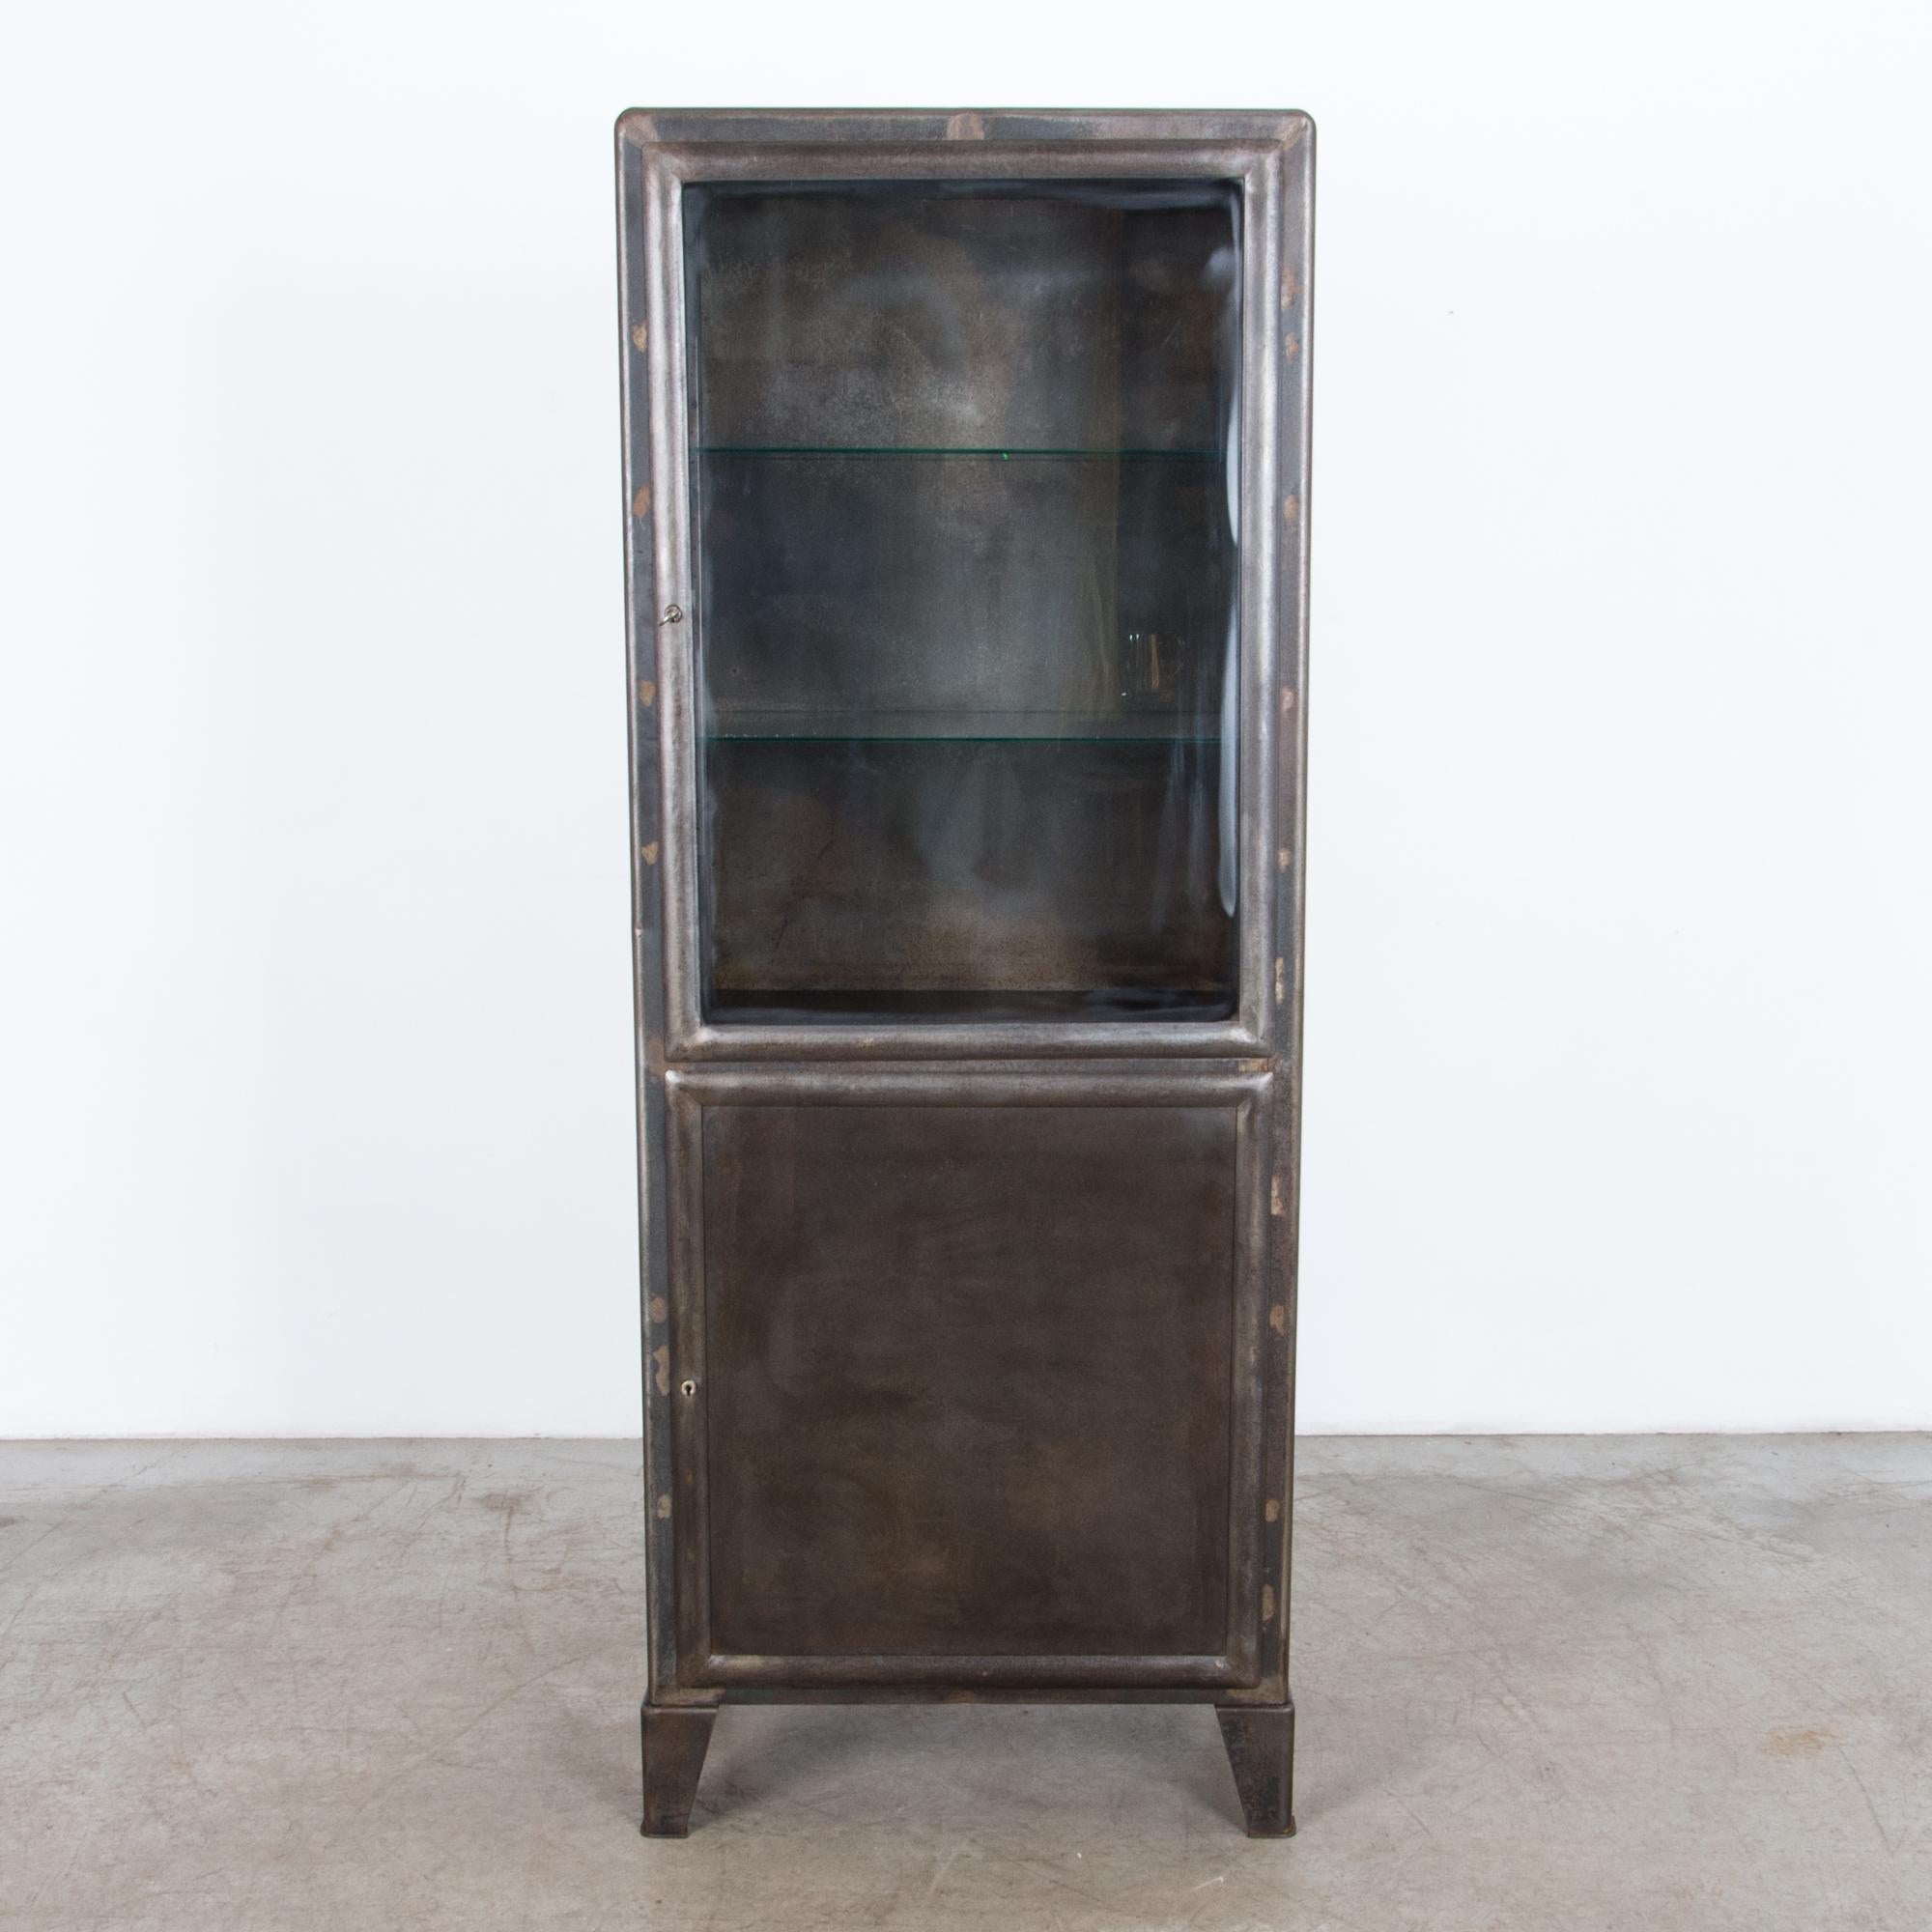 A two door metal vitrine from Czech Republic circa 1930. This polished steel cabinet was
originally designed for industrial use, it features durable locking hardware and purpose built steel construction. The glass interior shelves, and textured